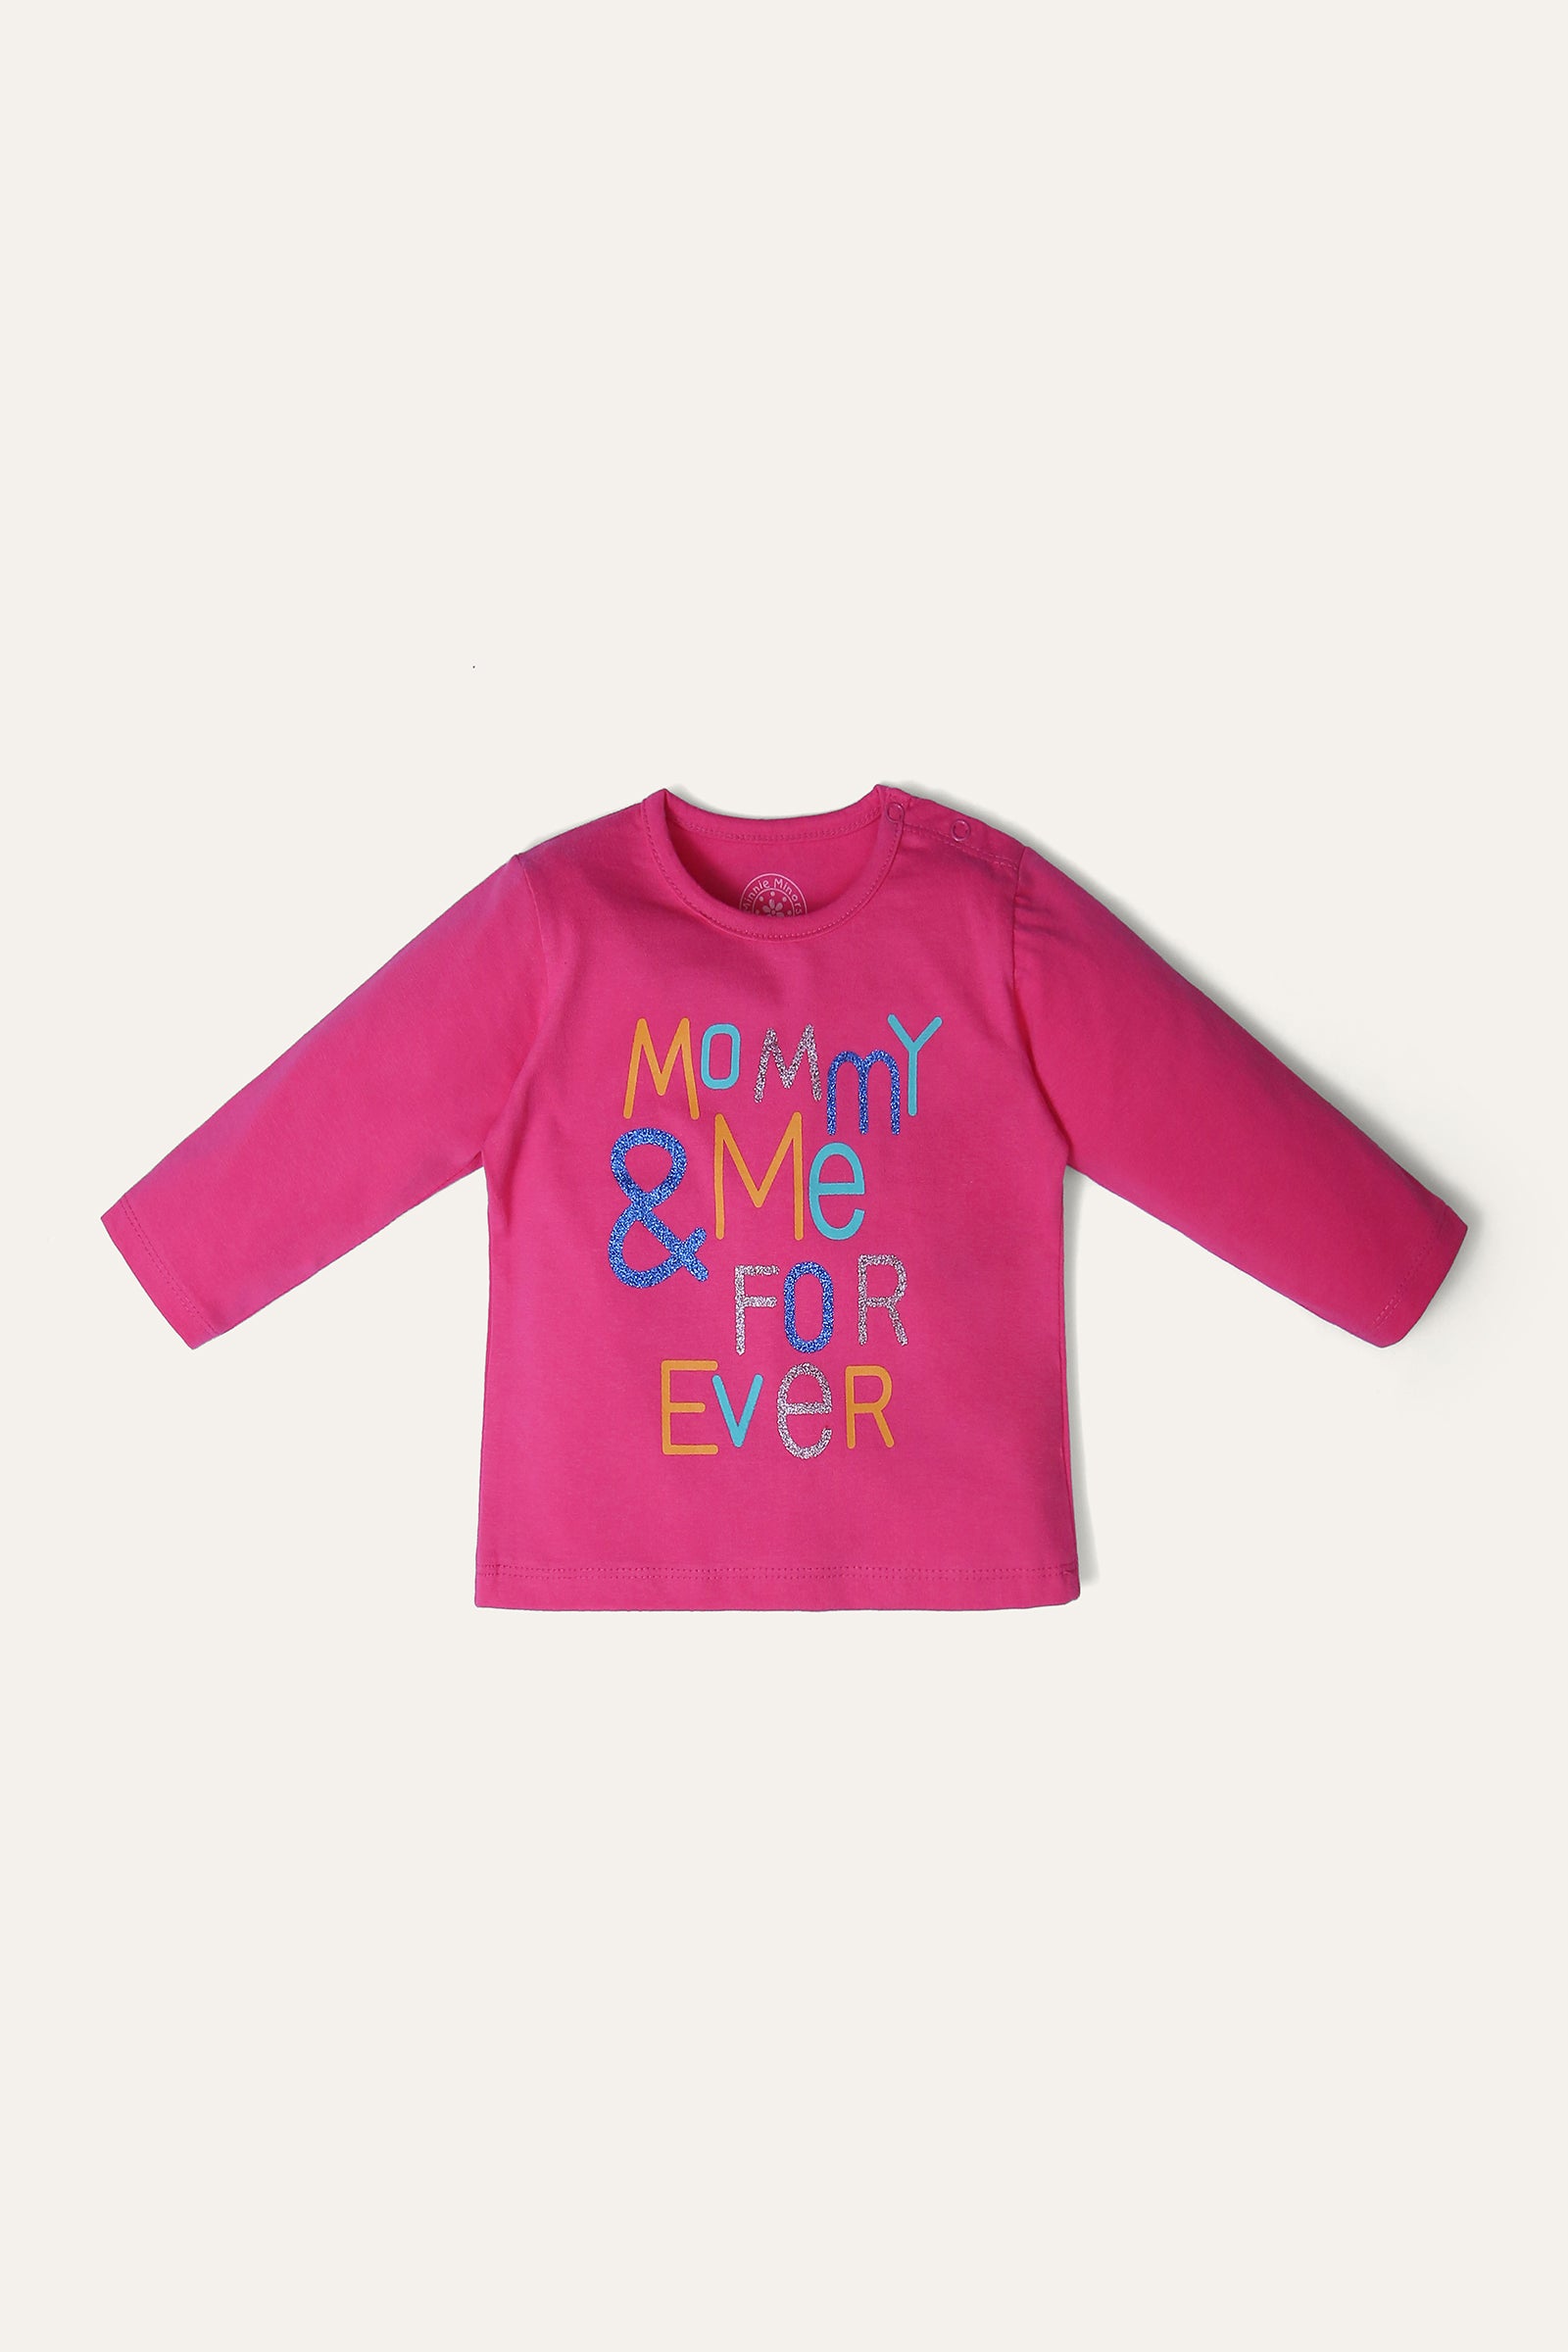 Graphic T-Shirt - Soft Jersey | Pink - Best Kids Clothing Brands In Pakistan Online|Minnie Minors